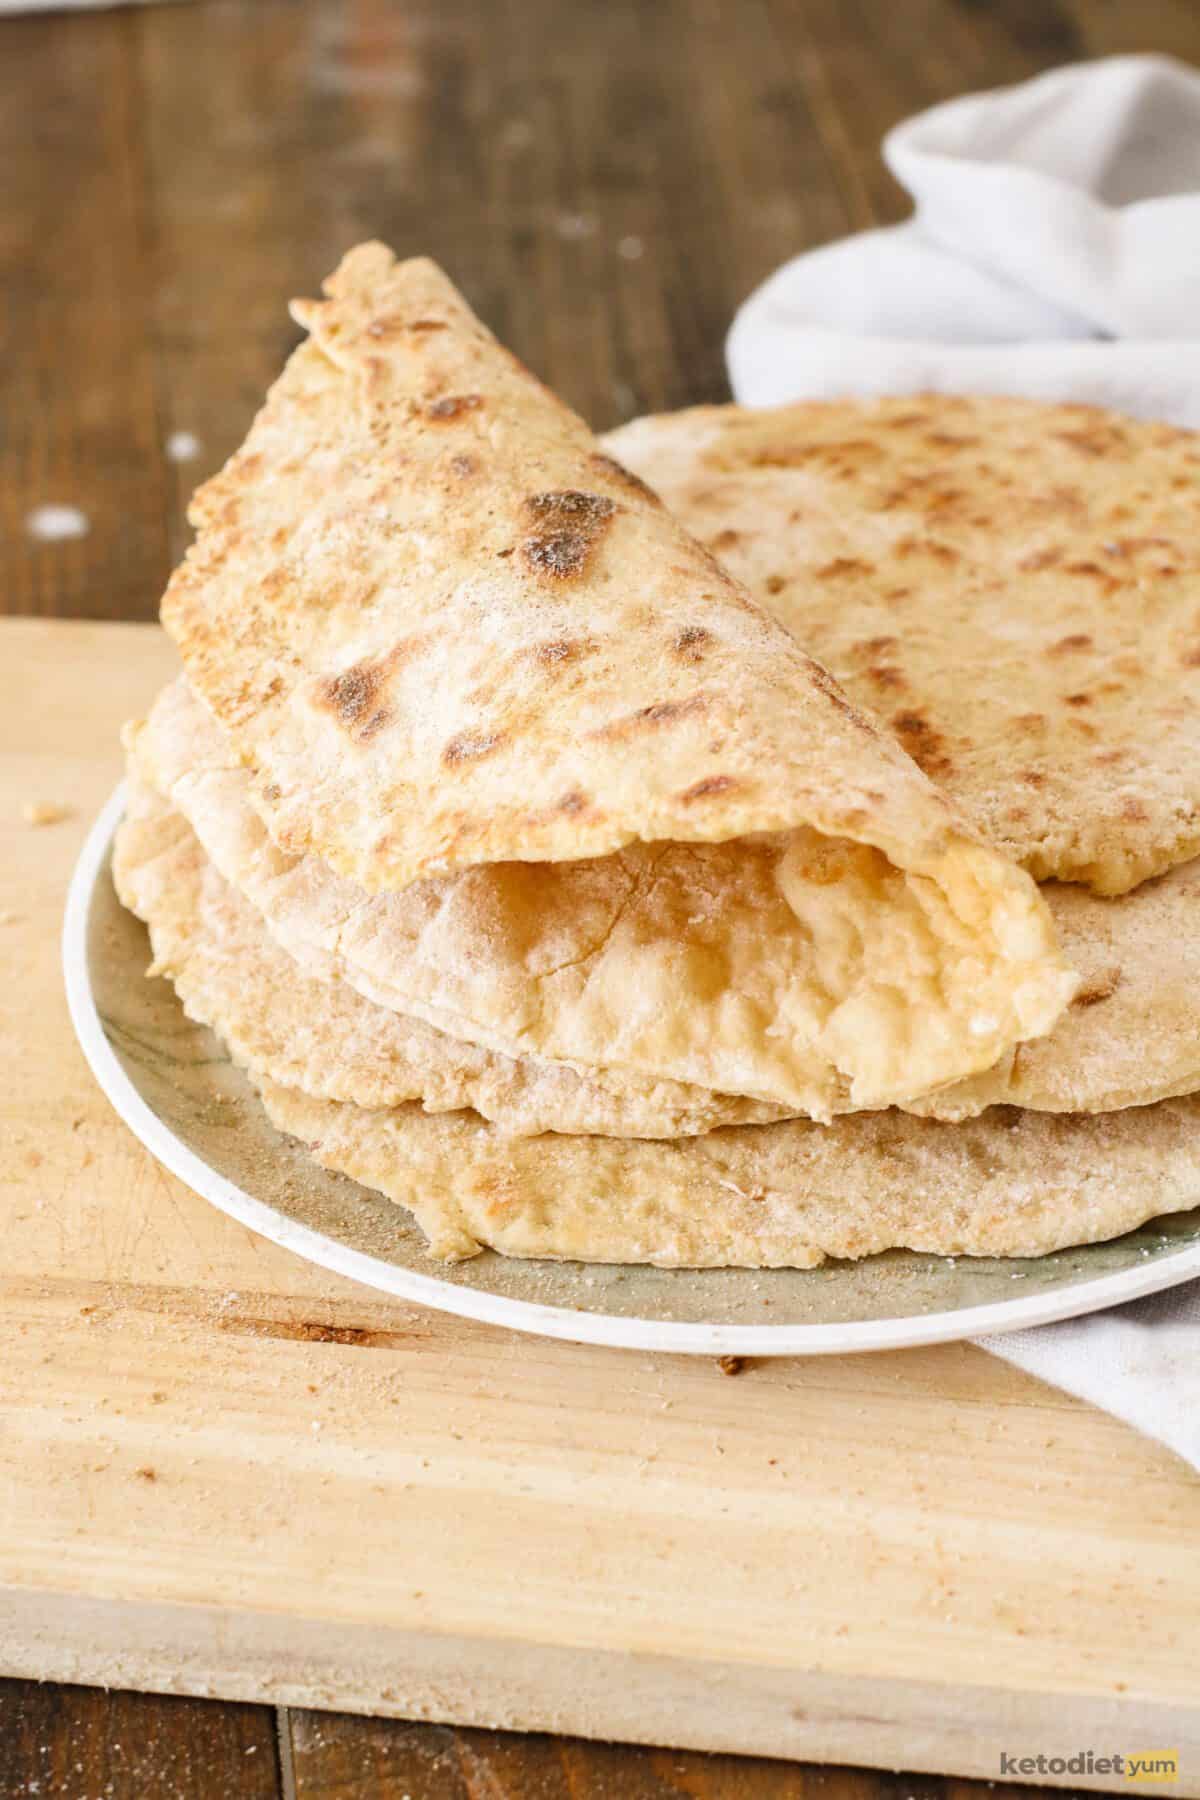 best low carb tortillas recipe - cooked tortillas ready to enjoy